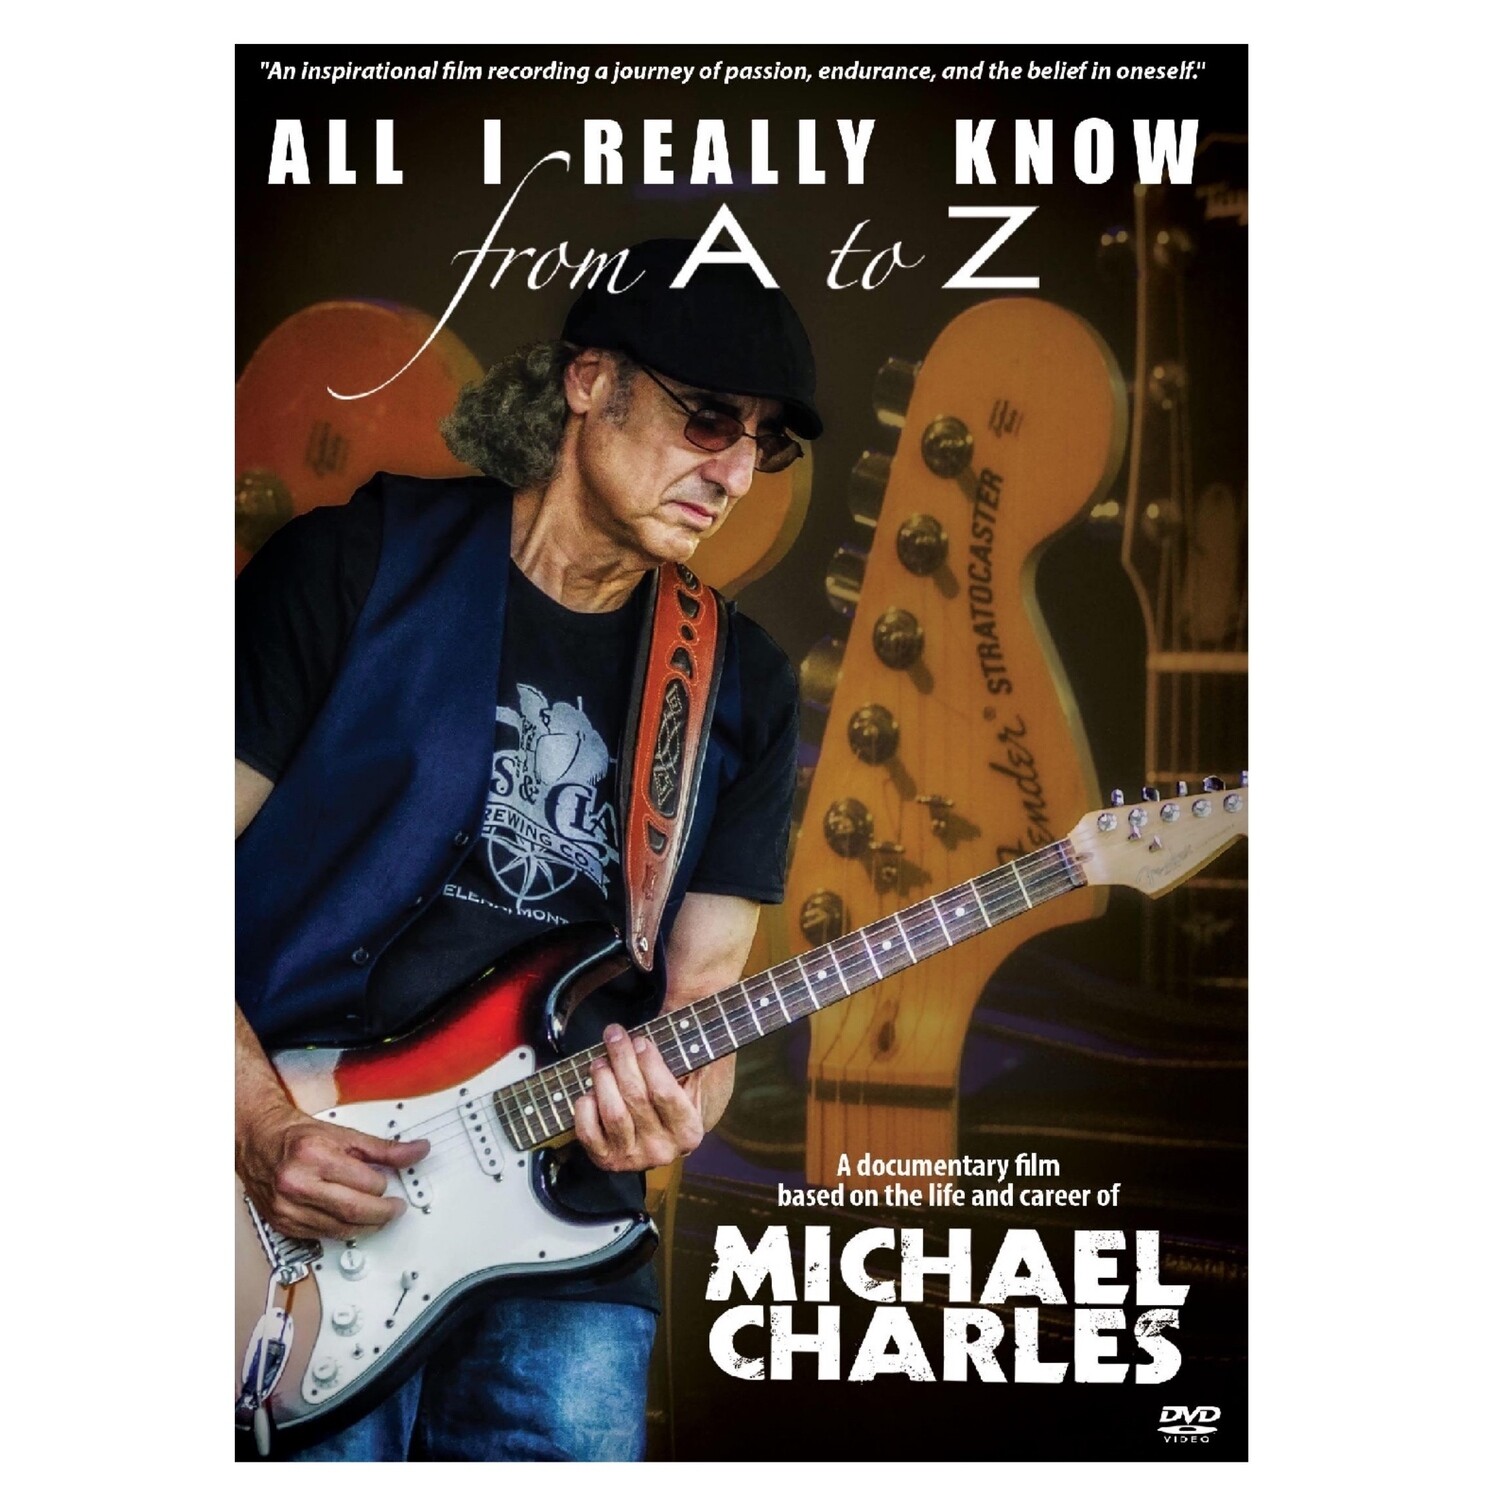 All I Really Know from A to Z (DVD)